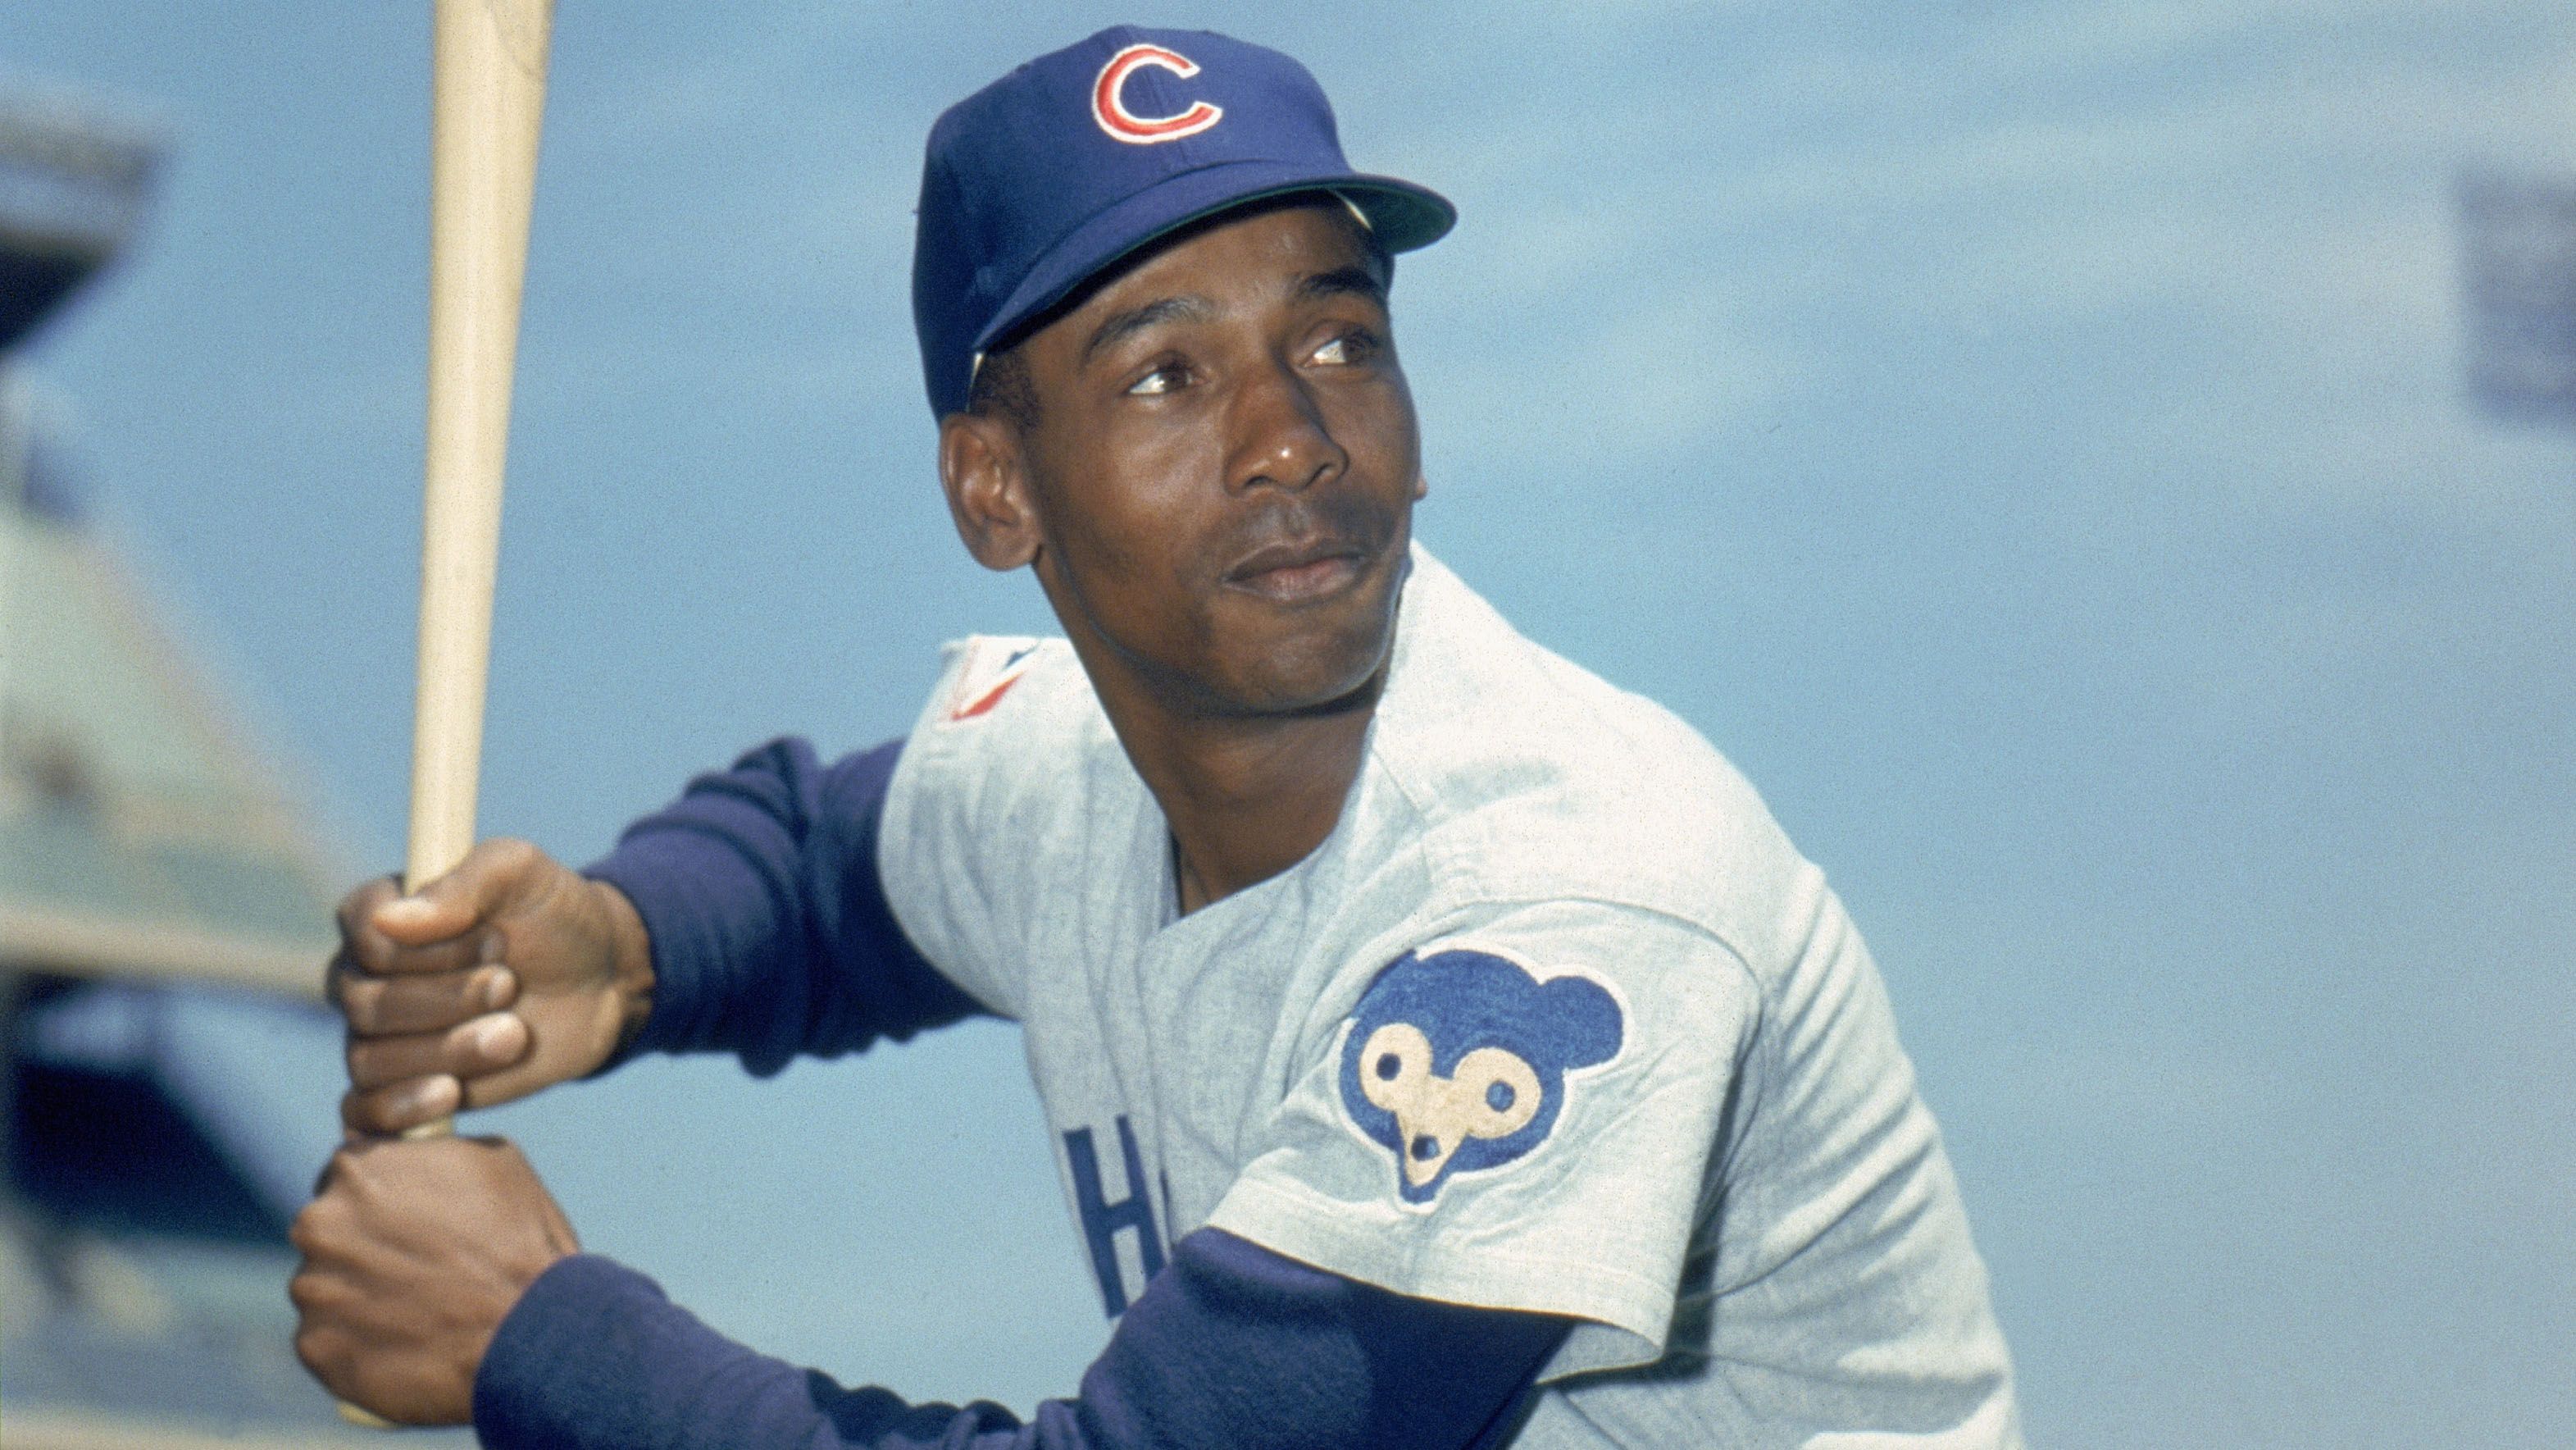 Chicago Cubs' Ernie Banks 1969 game-worn jersey up for auction